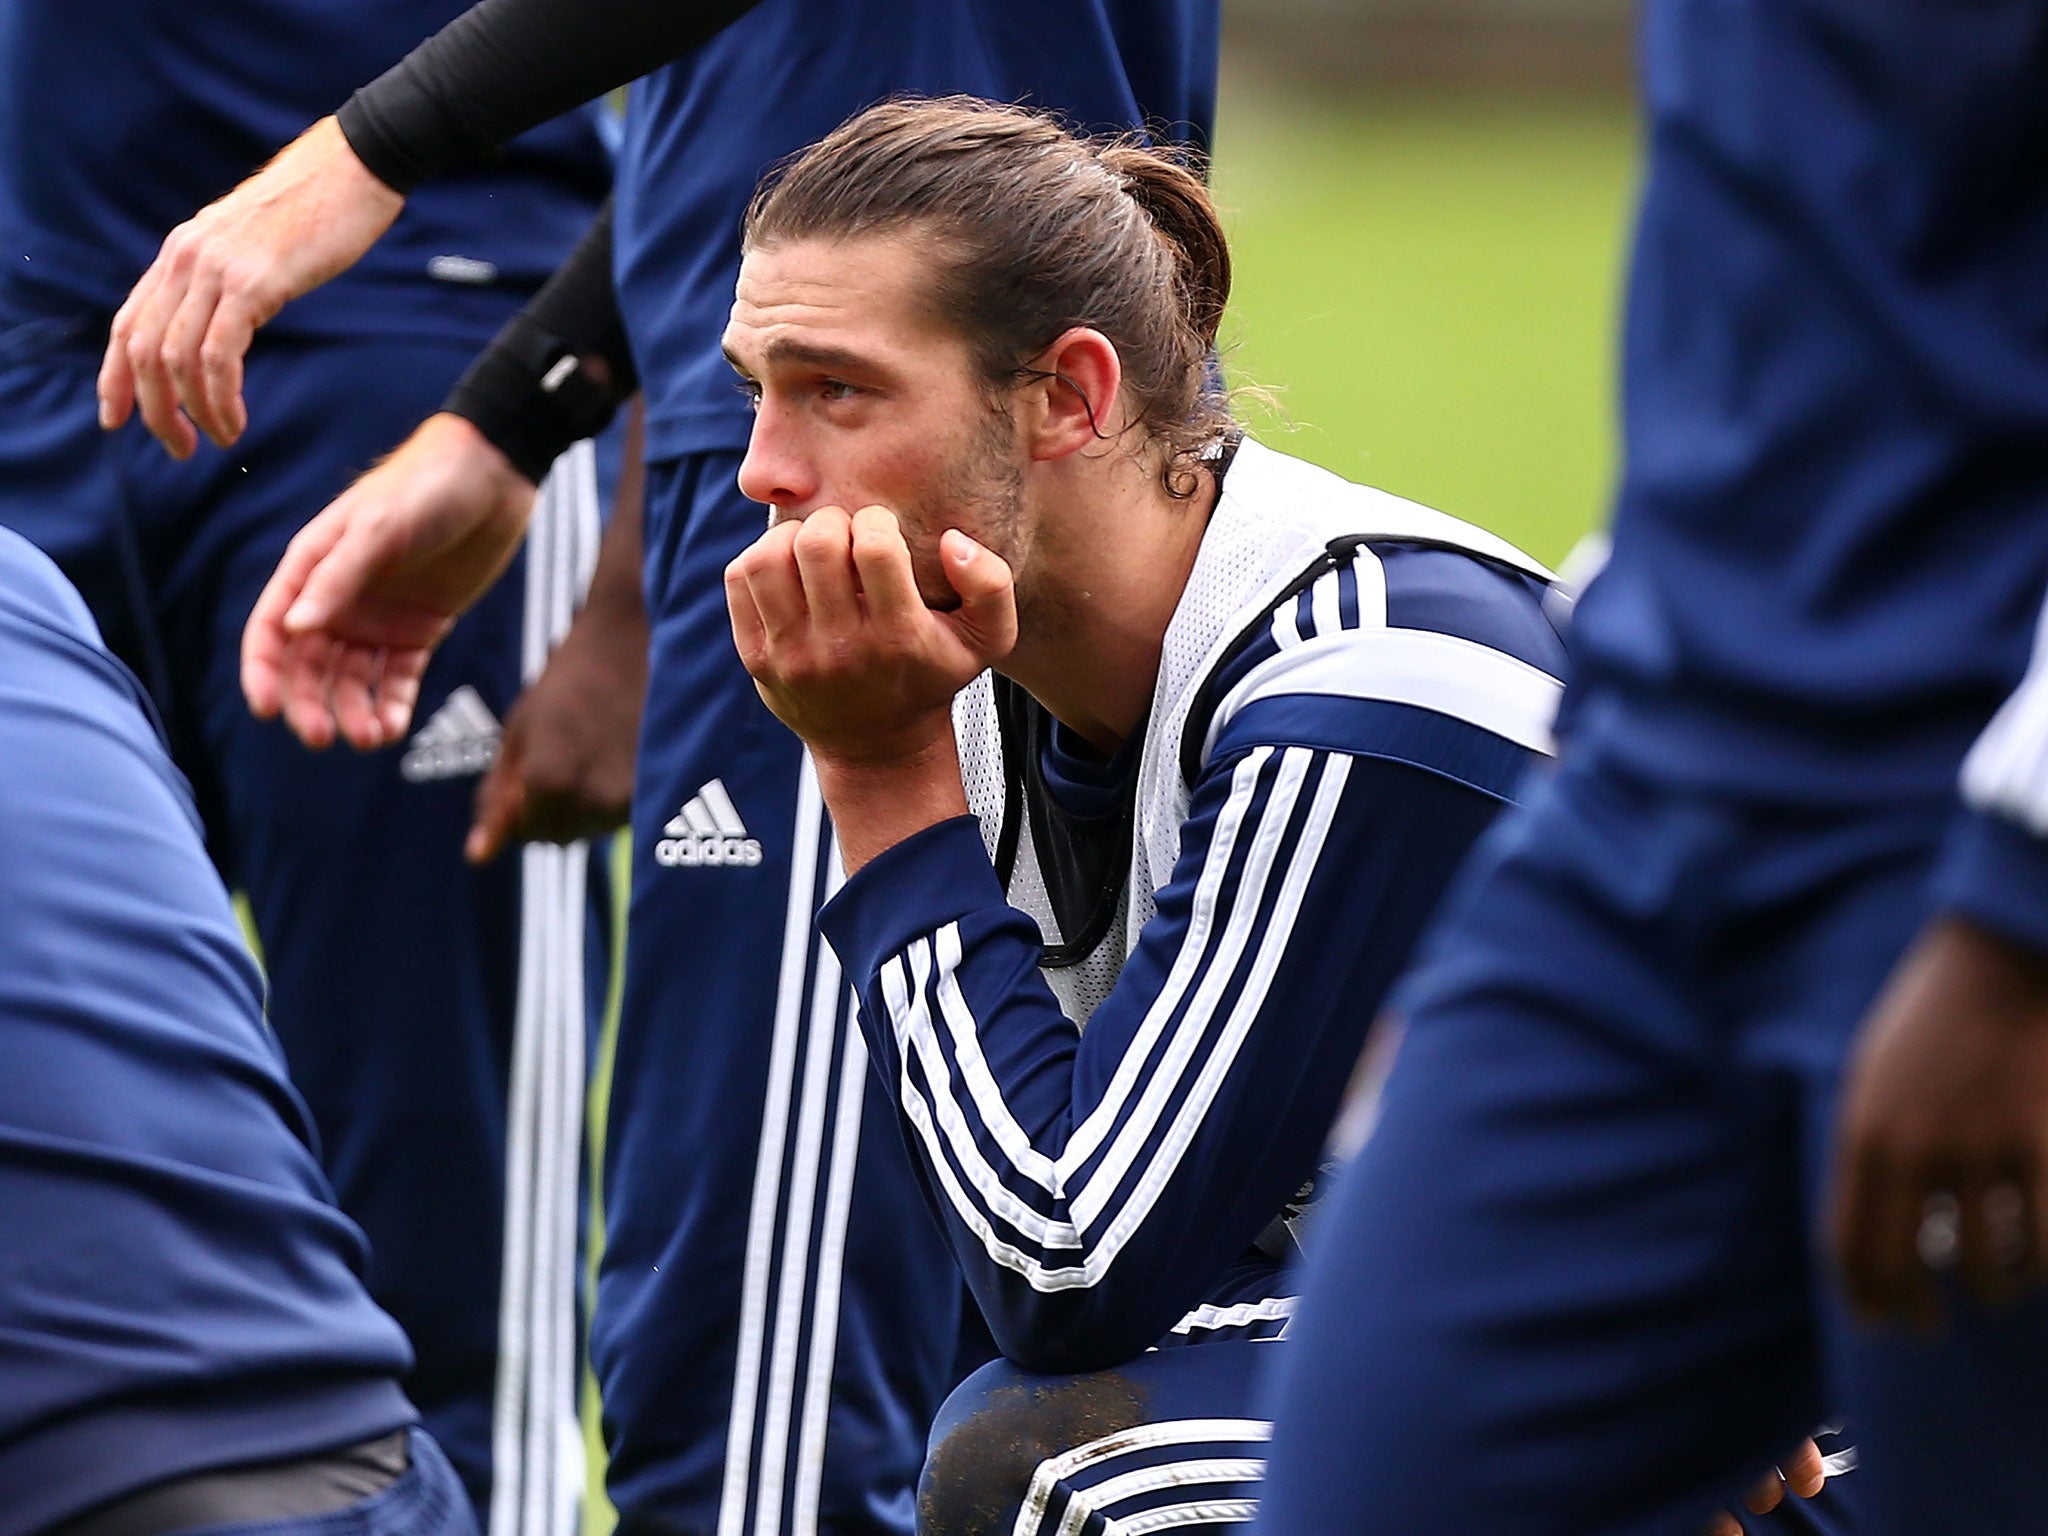 Andy Carroll has suffered an ankle injury that could keep him out of action for up to 16 weeks